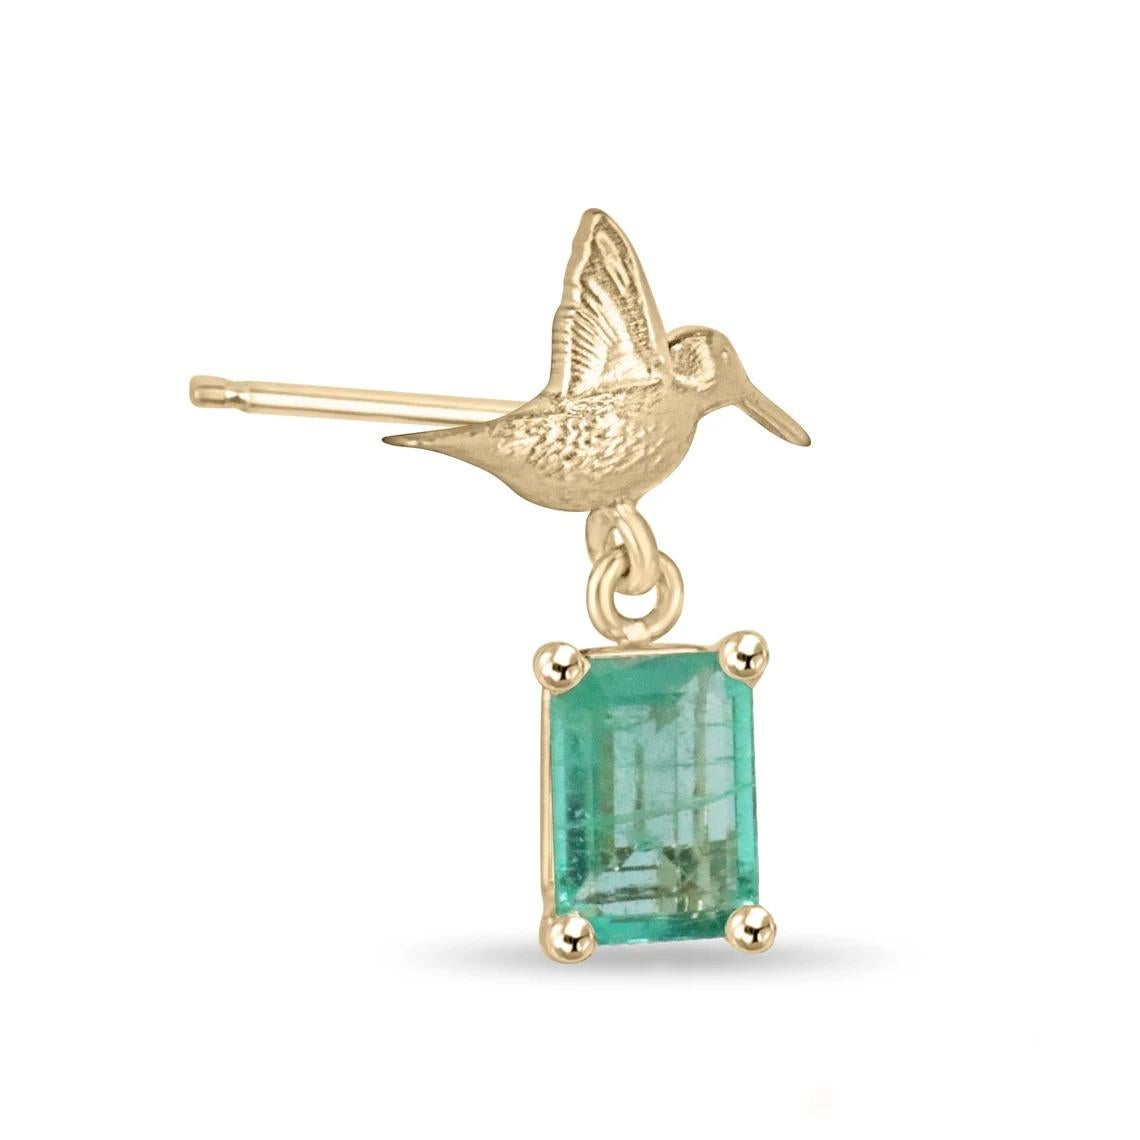 These emerald stud earrings feature captivating emeralds with a combined weight of 1.90 carats. The emeralds showcase an emerald cut, displaying a medium green color and unique characteristics that add to their allure. Set in a secure four-prong